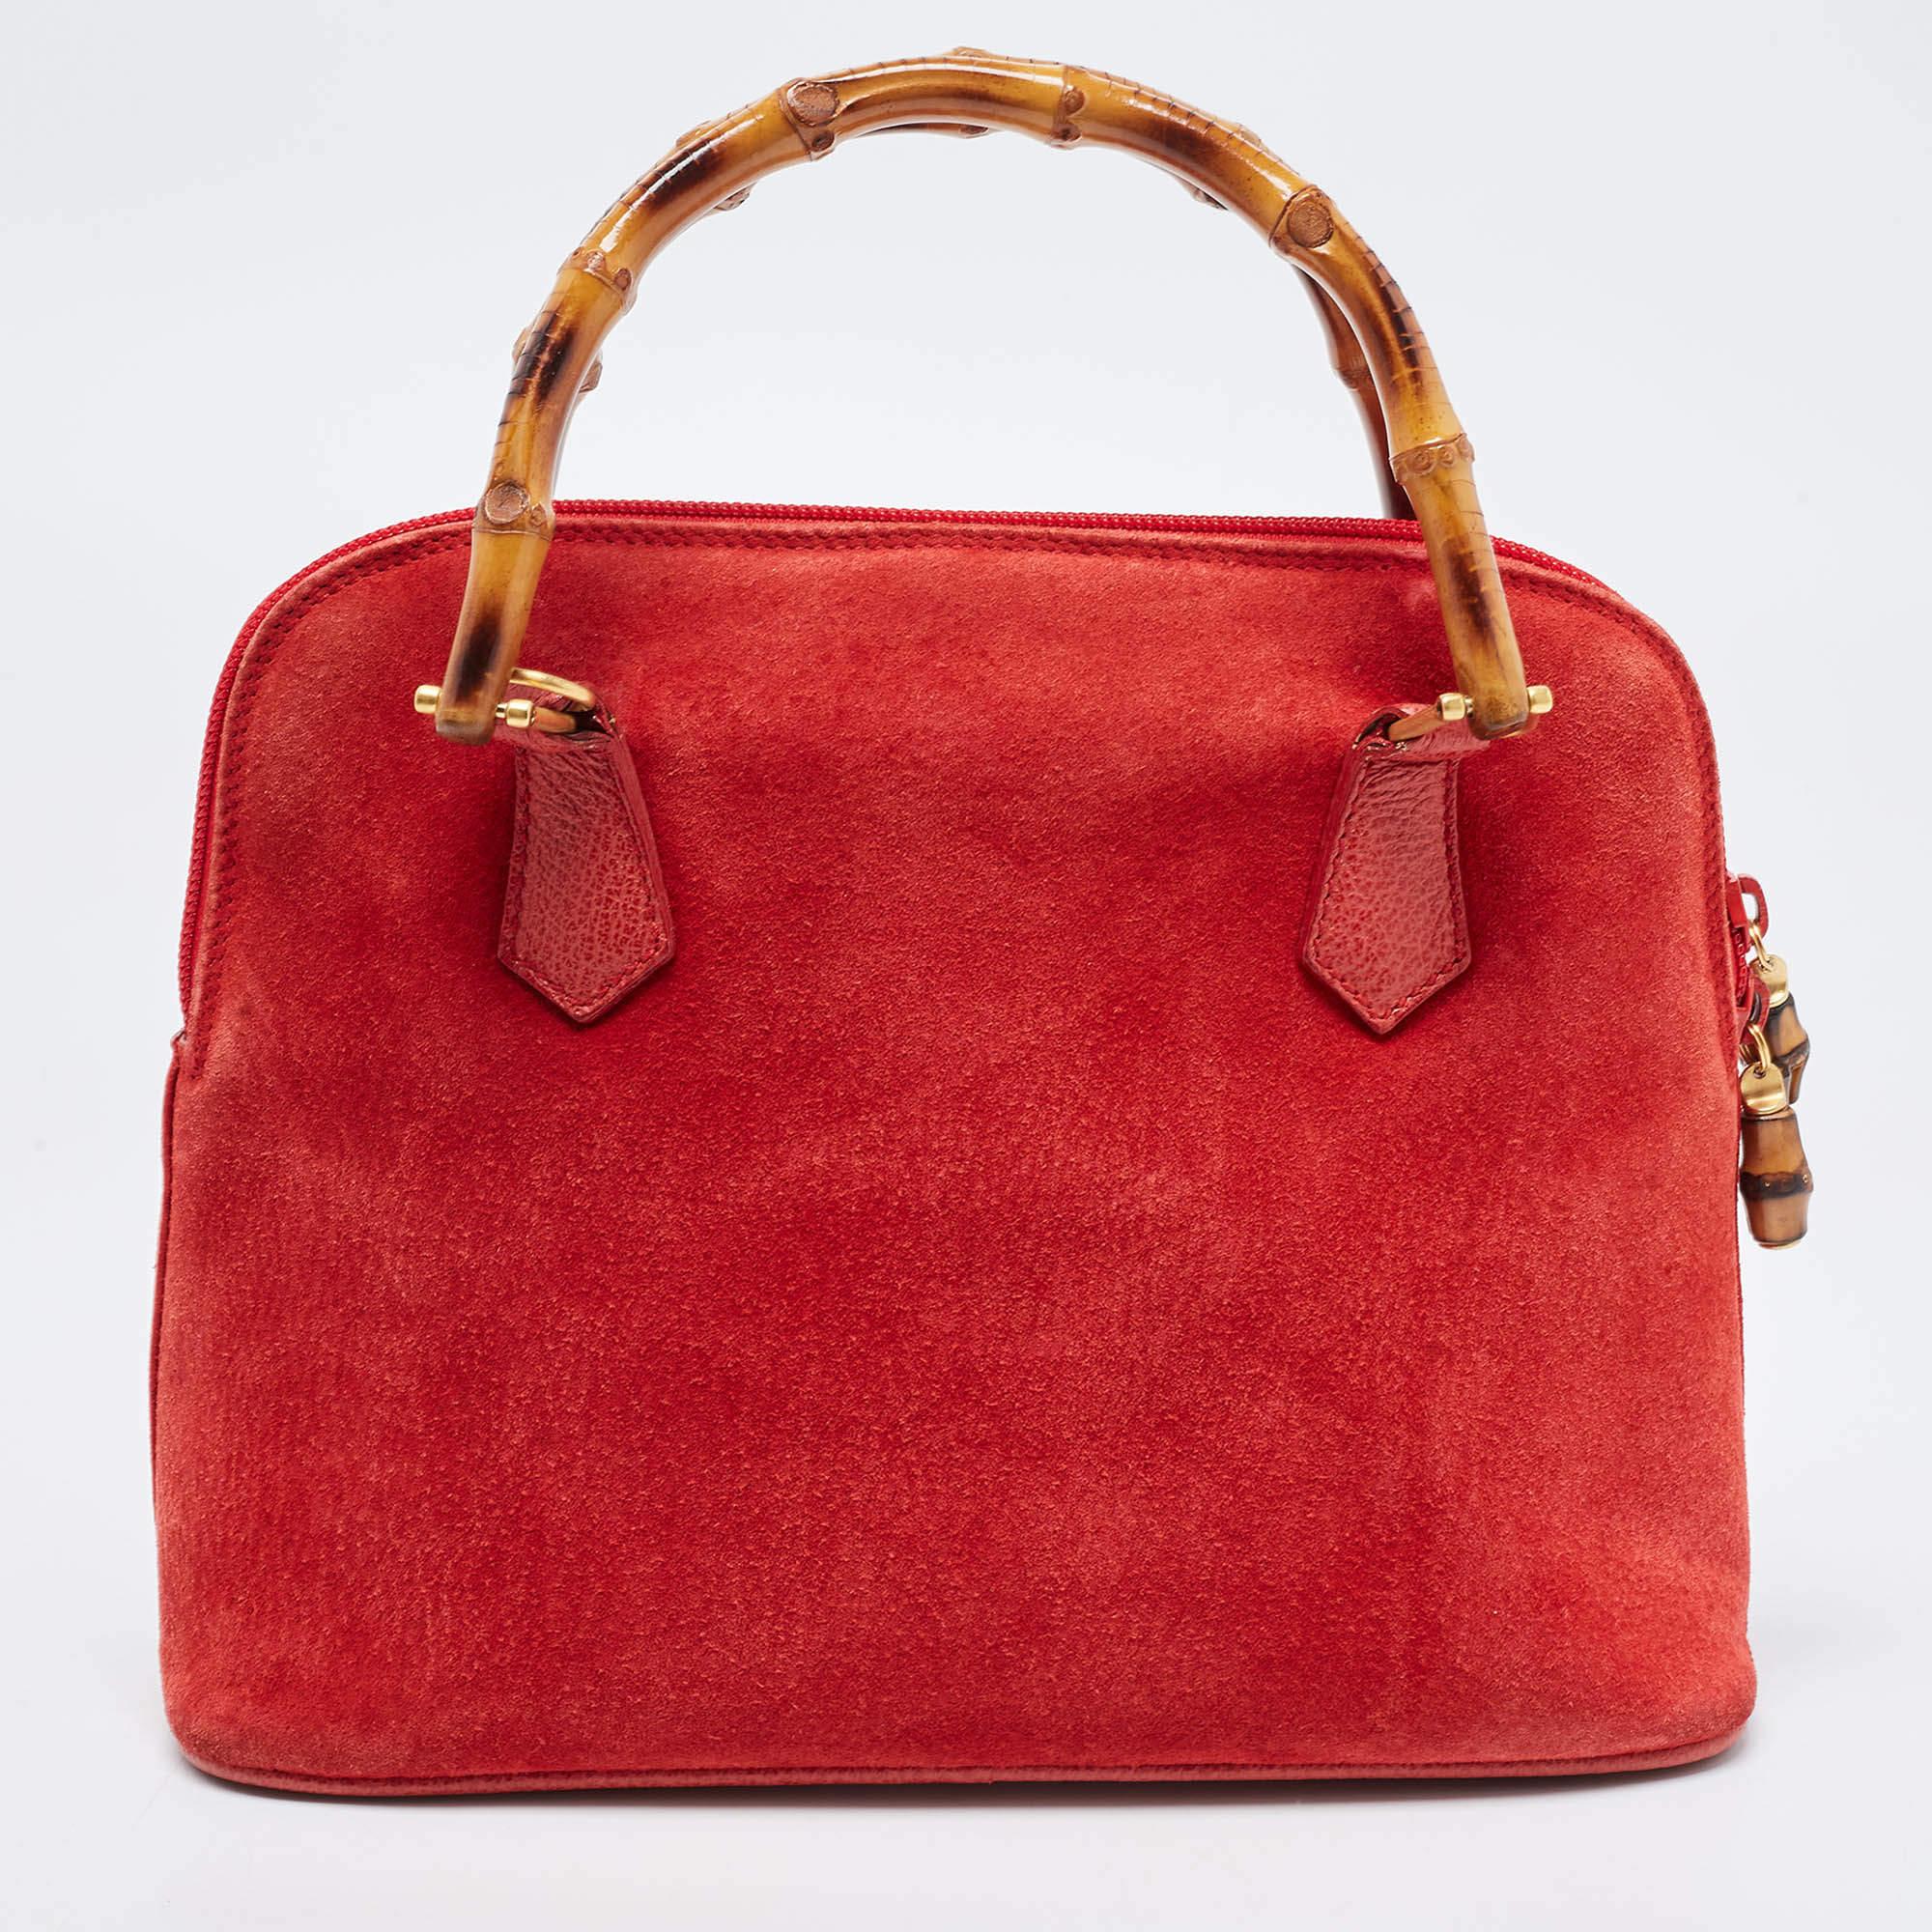 Gucci Red Suede and Leather Bamboo Handle Satchel For Sale 2